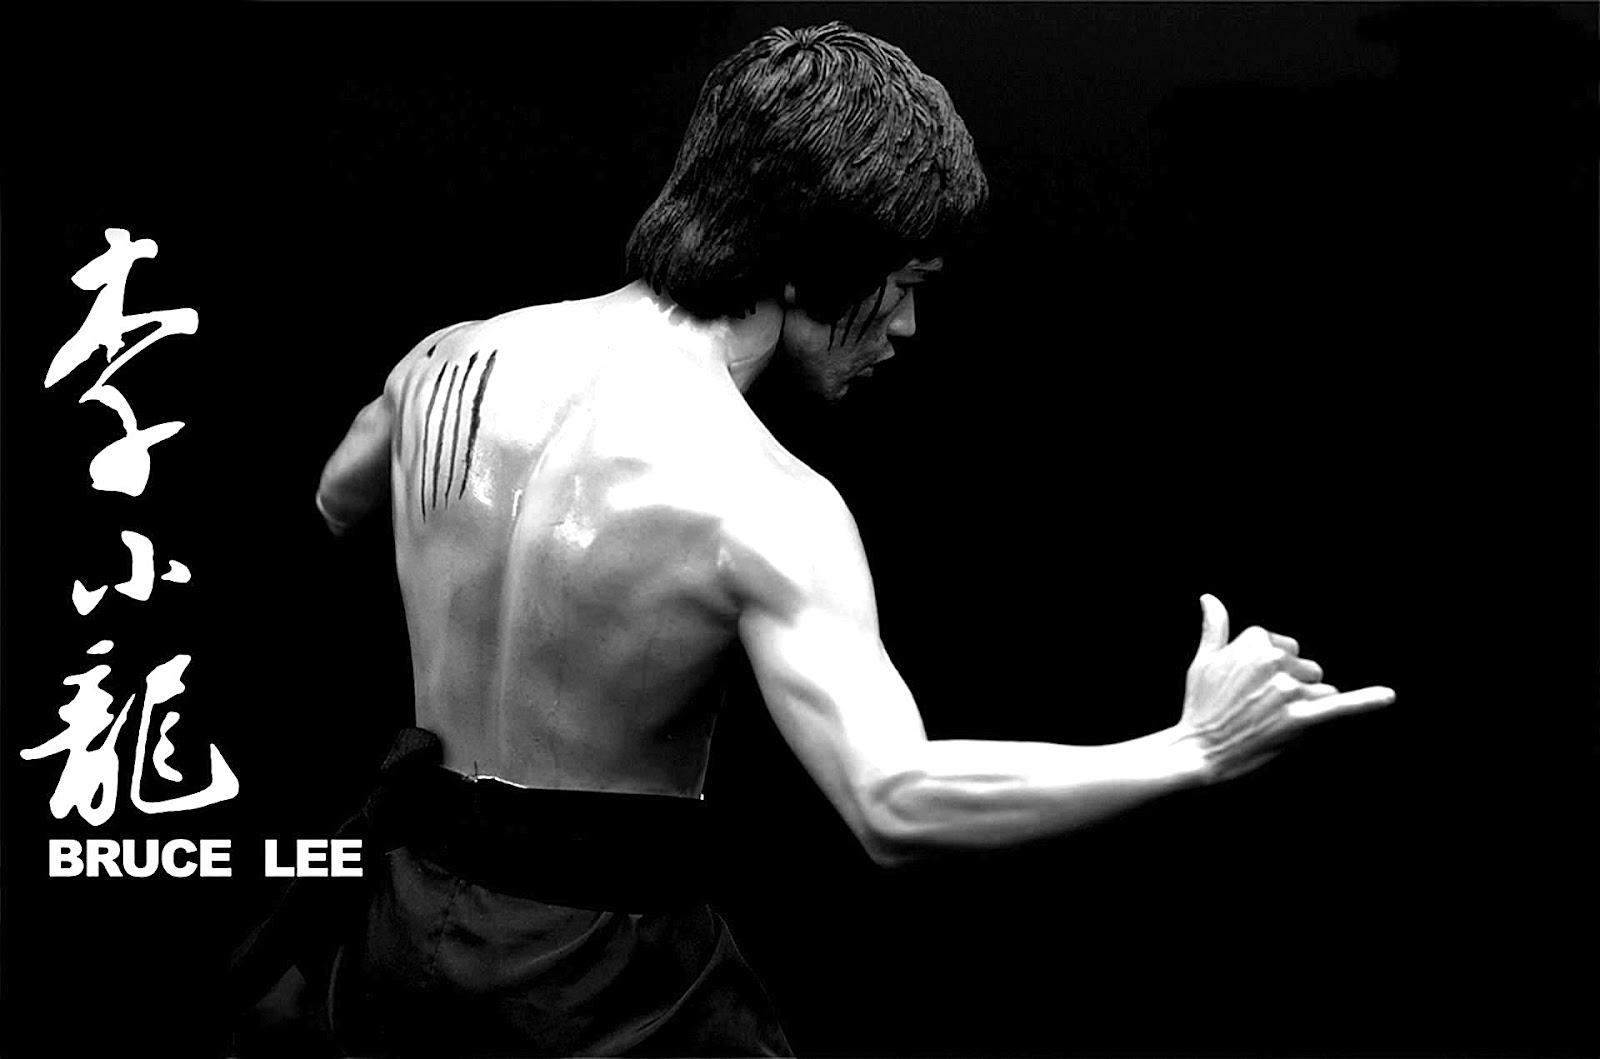 Japanese wallpapers Bruce Lee and JKD wallpapers